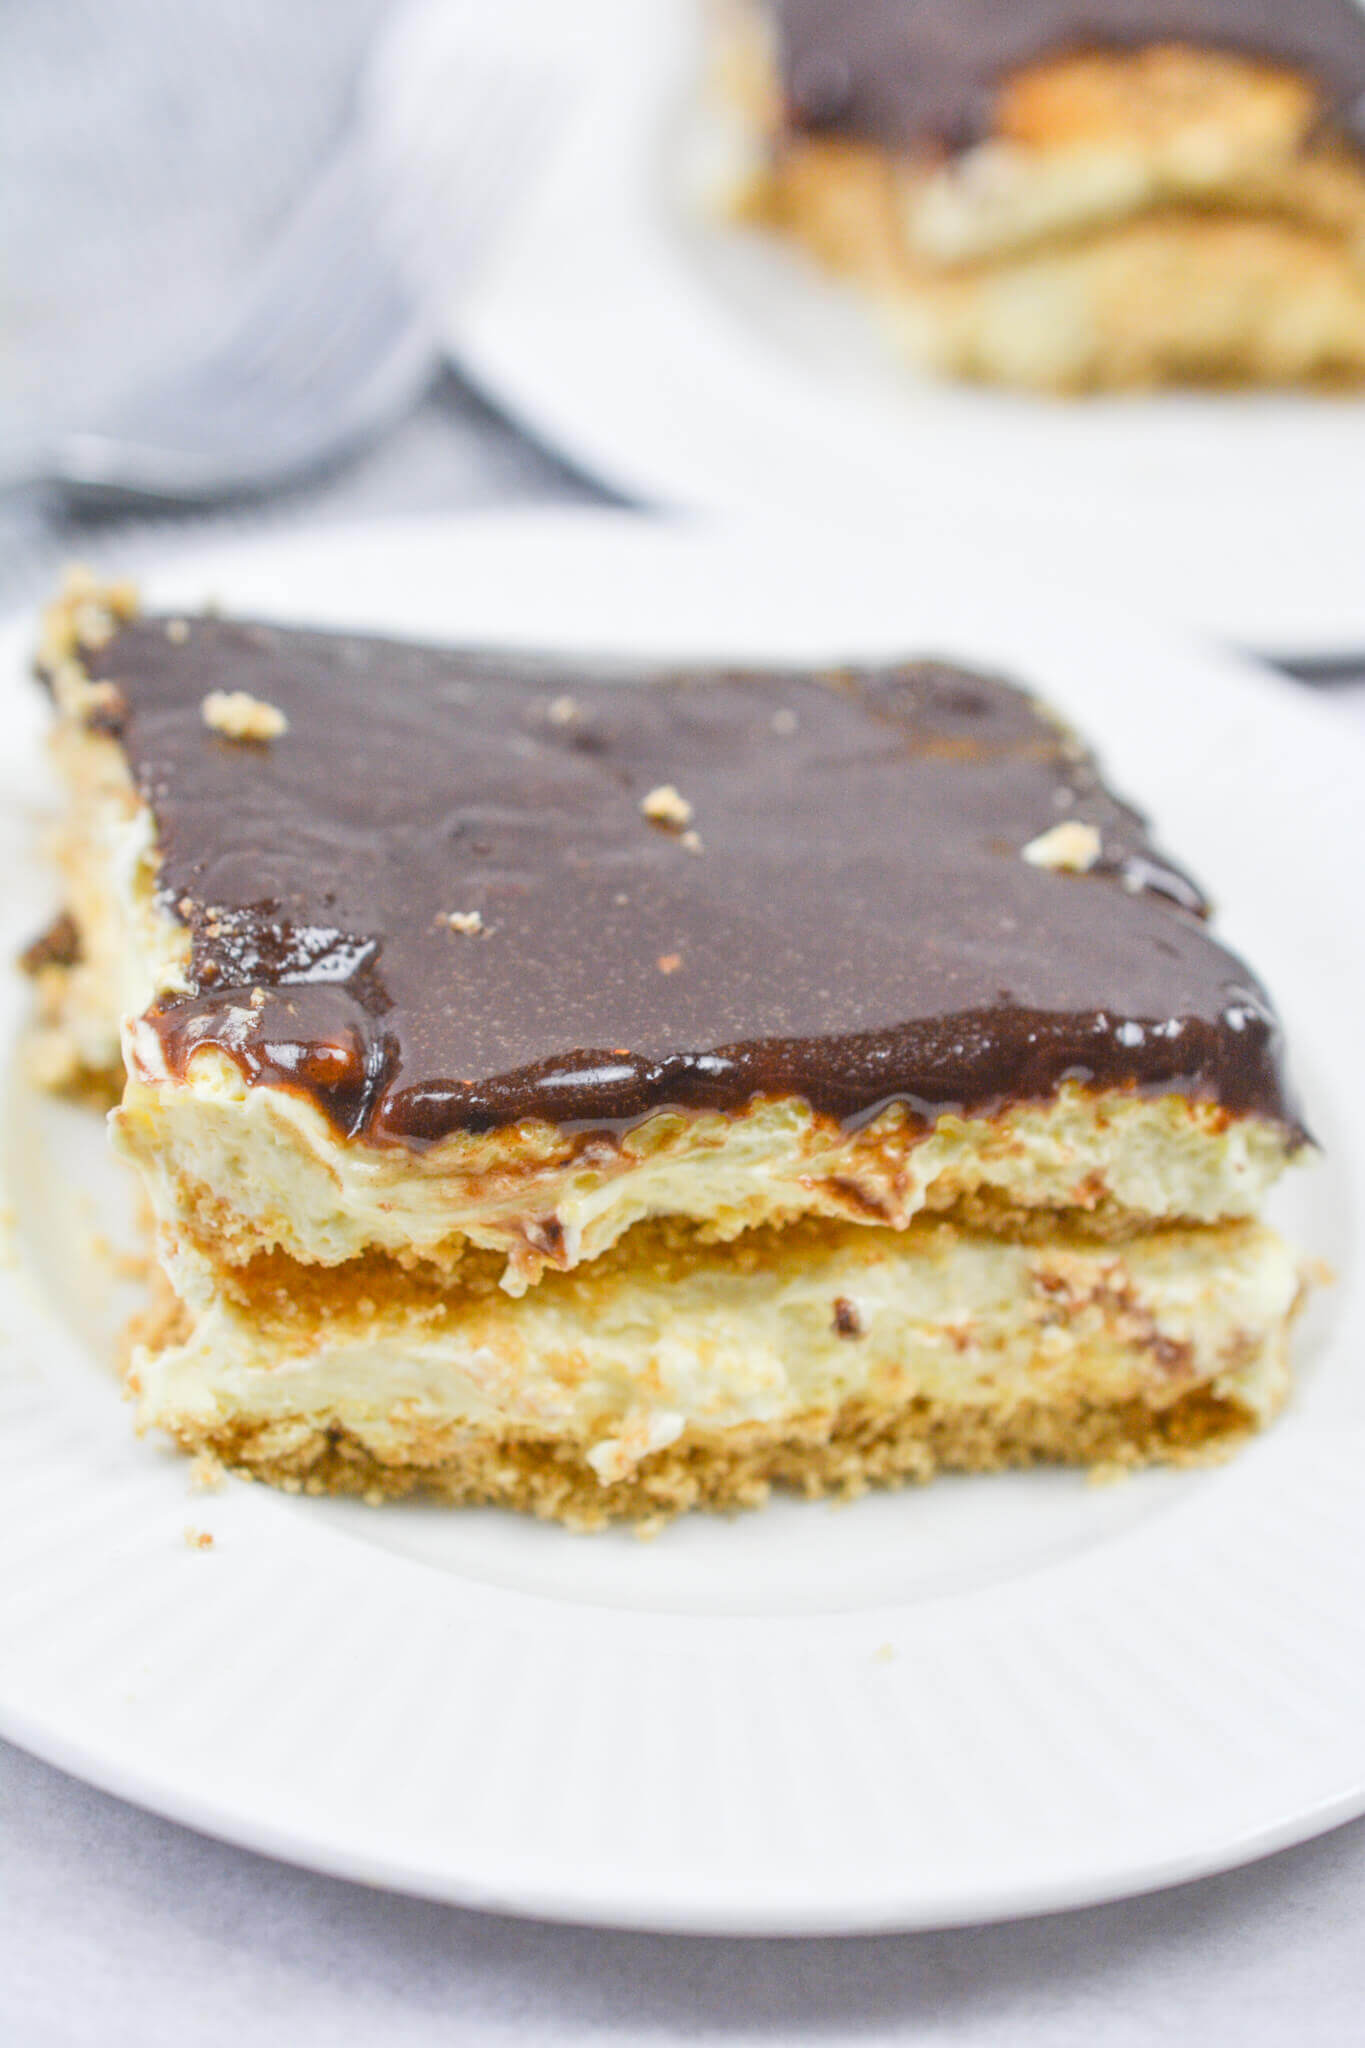 A side view of the no bake eclair Cake.